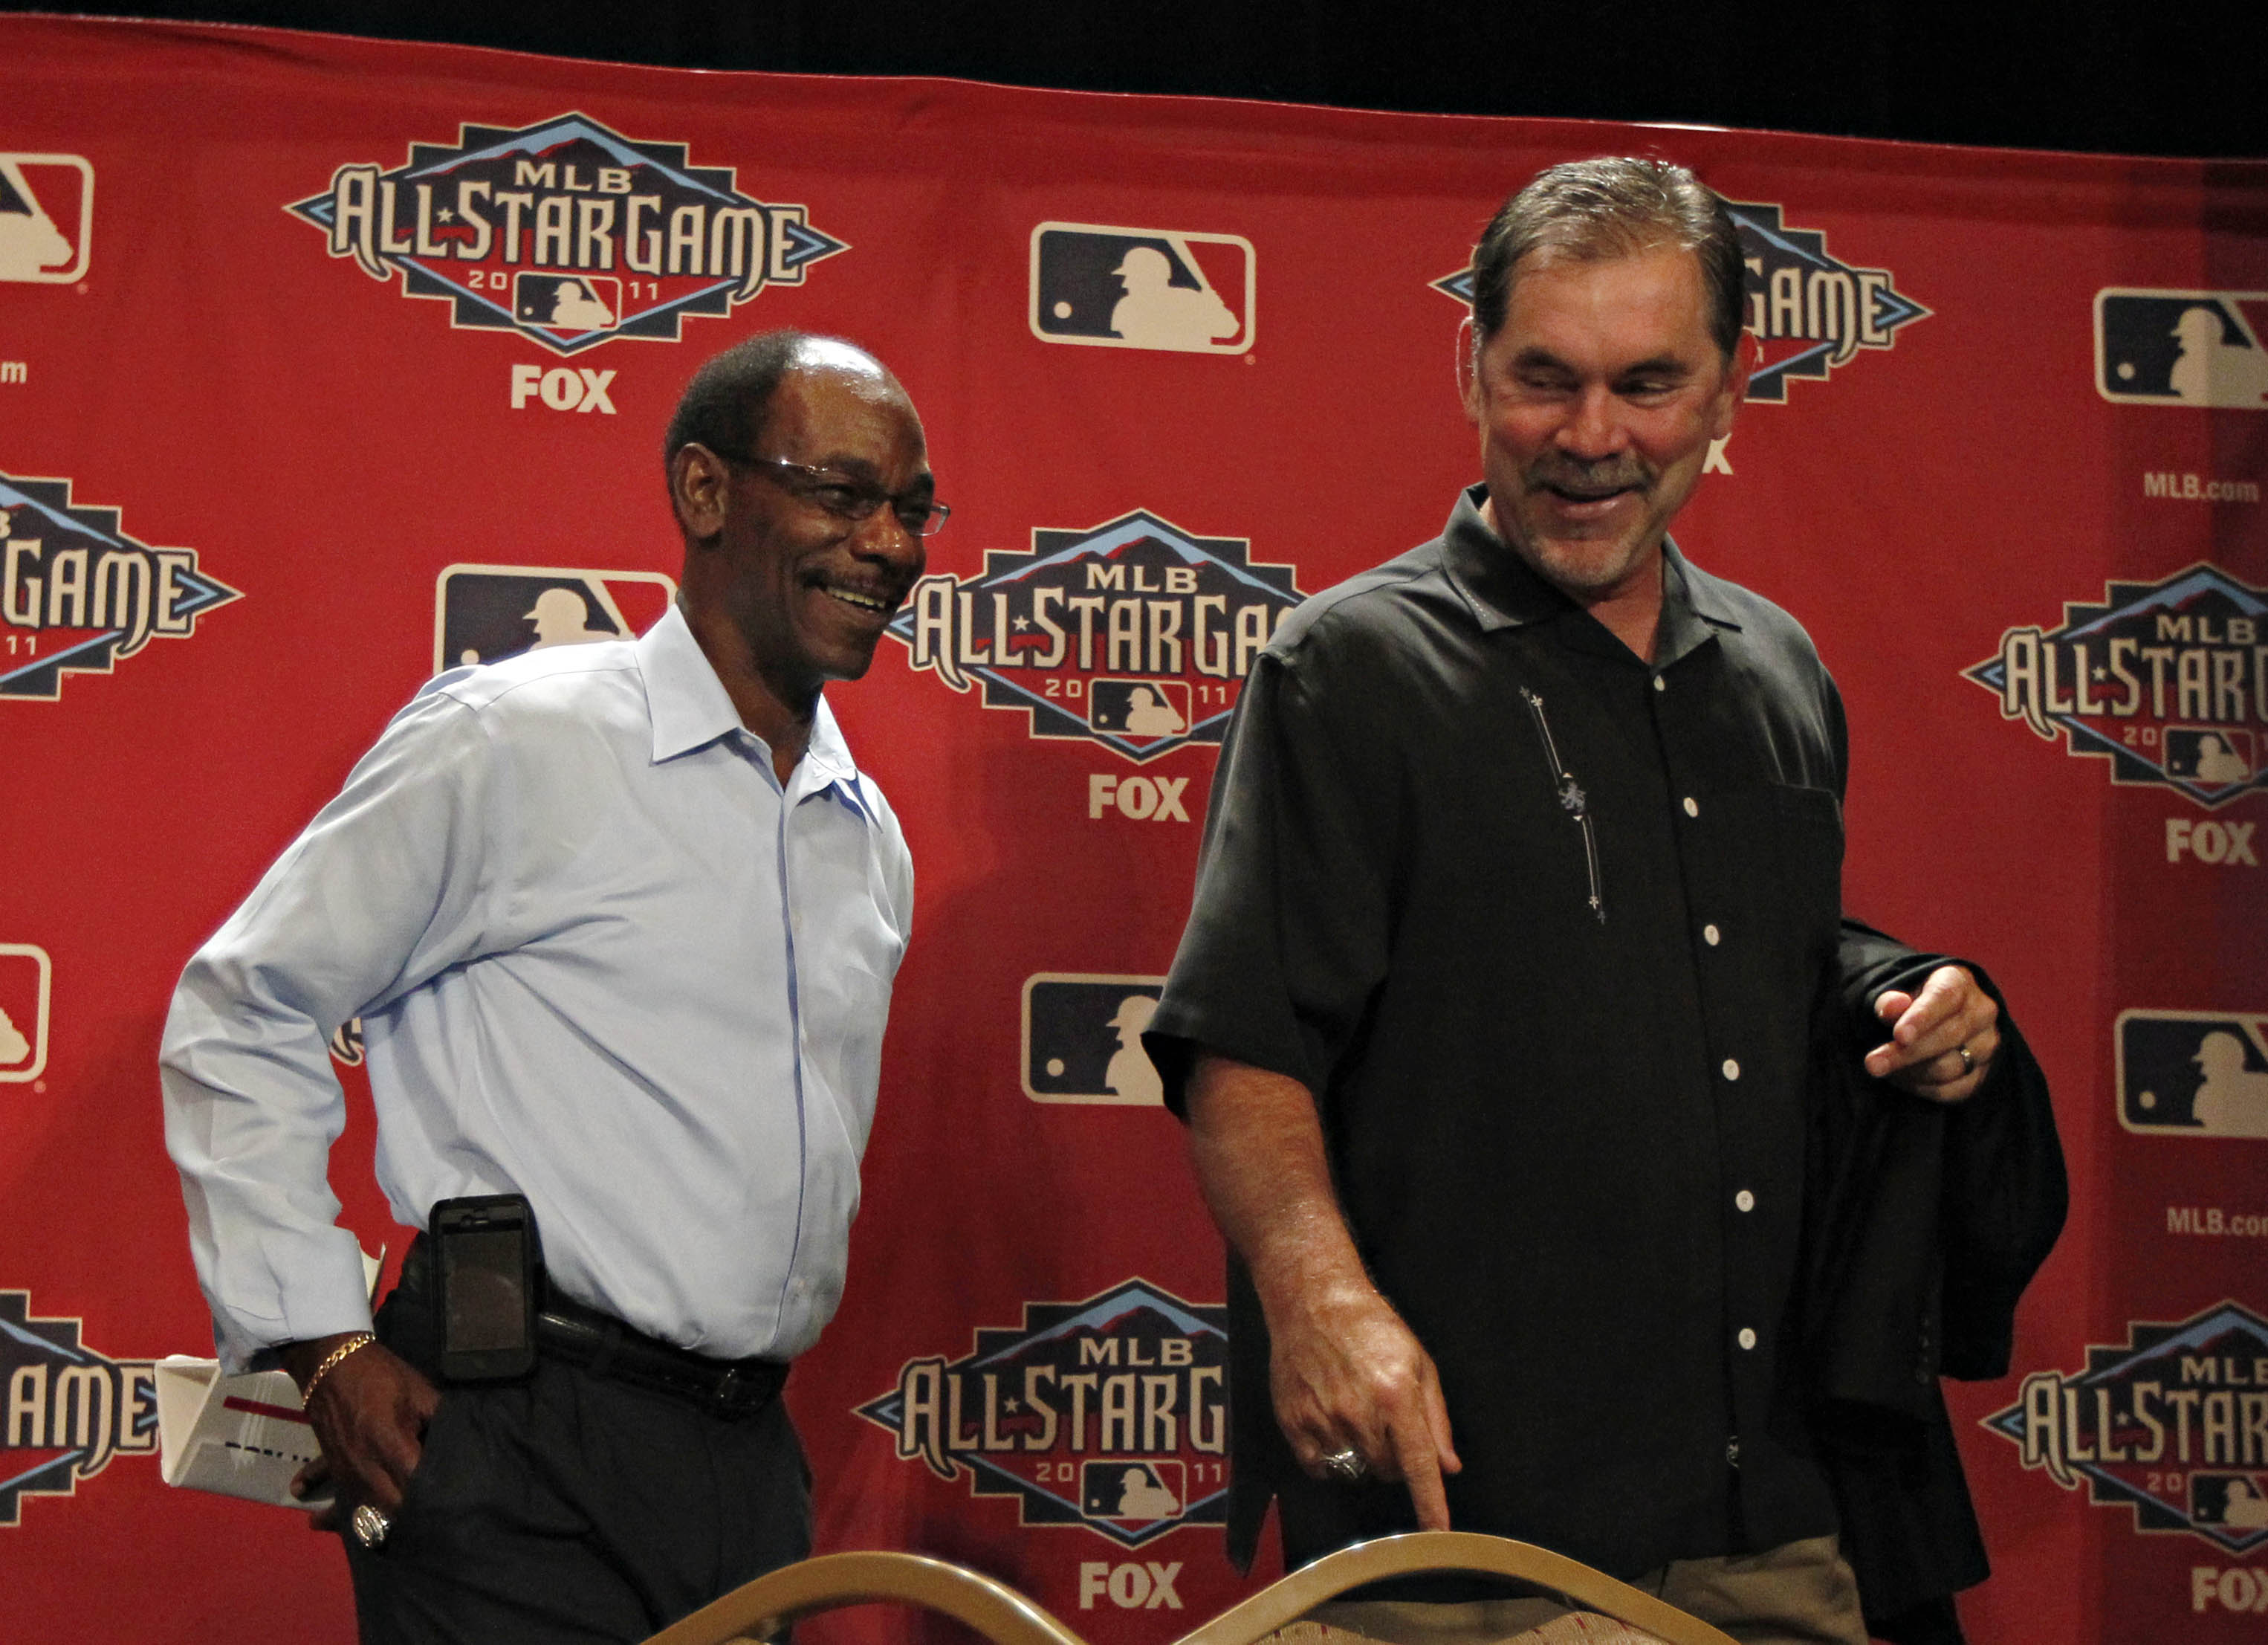 Rangers hire Bruce Bochy as next manager to replace Chris Woodward